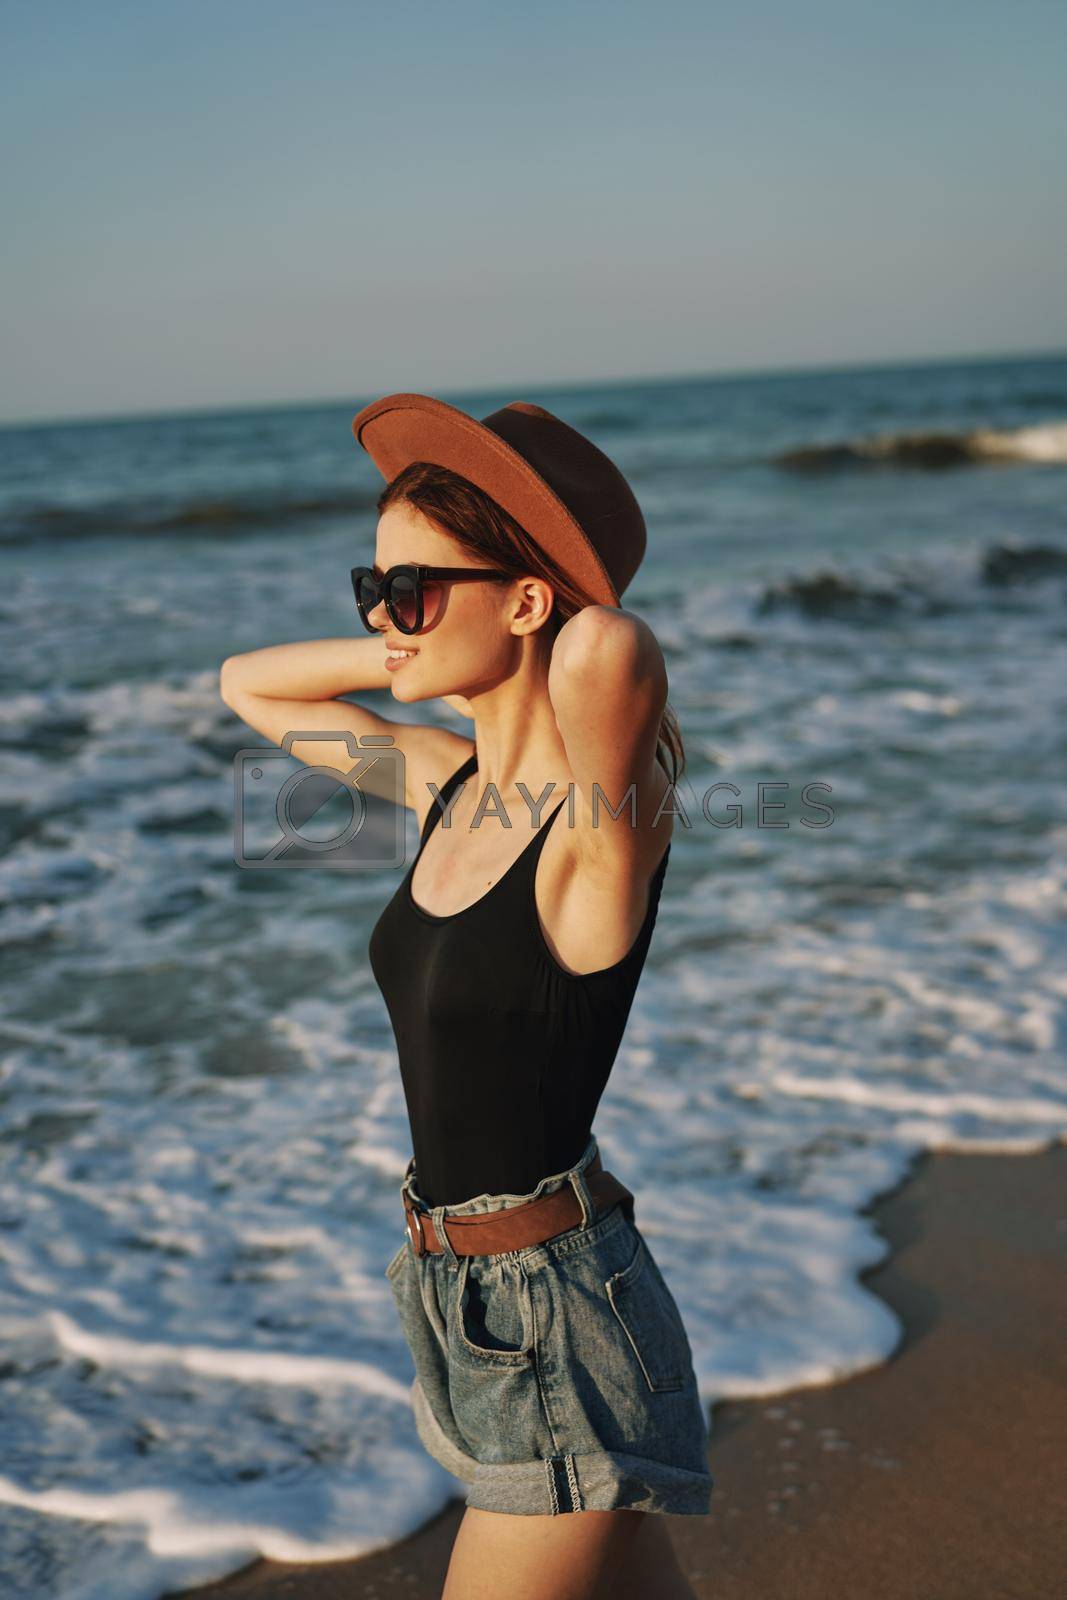 woman walking on the beach hat travel vacation sun. High quality photo